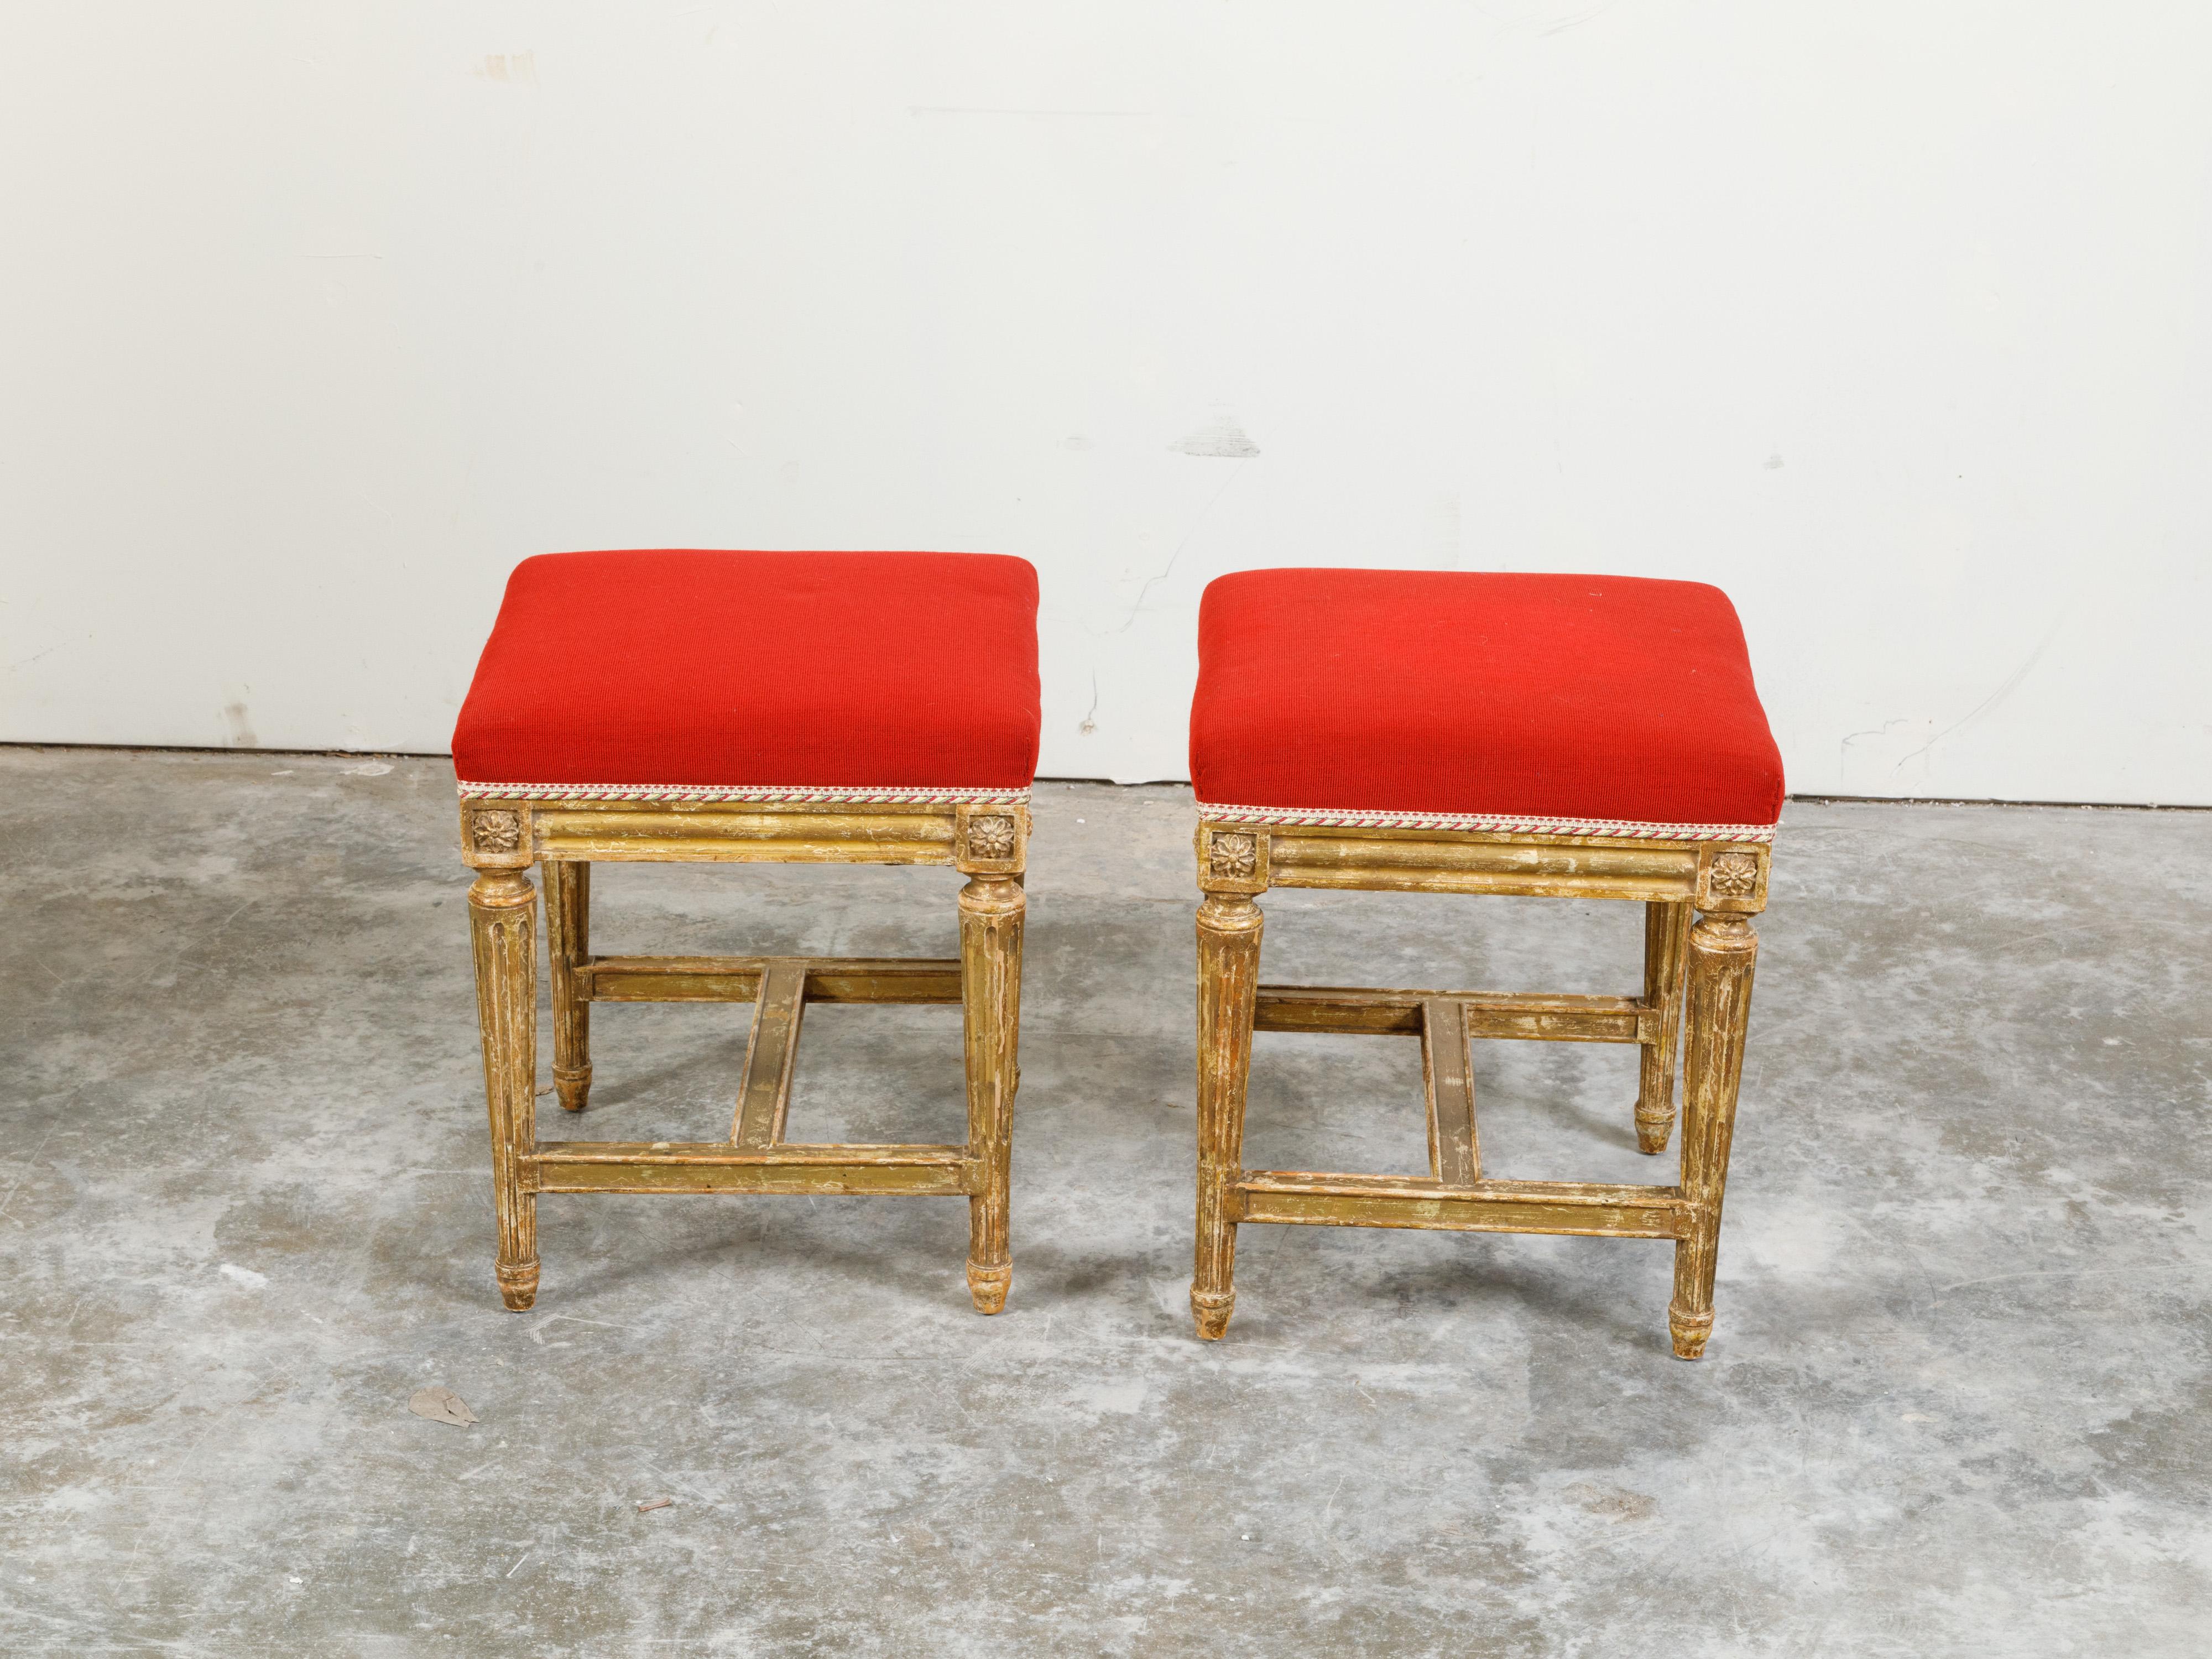 Fabric Pair of Neoclassical Style 19th Century Painted Stools with Red Upholstery For Sale